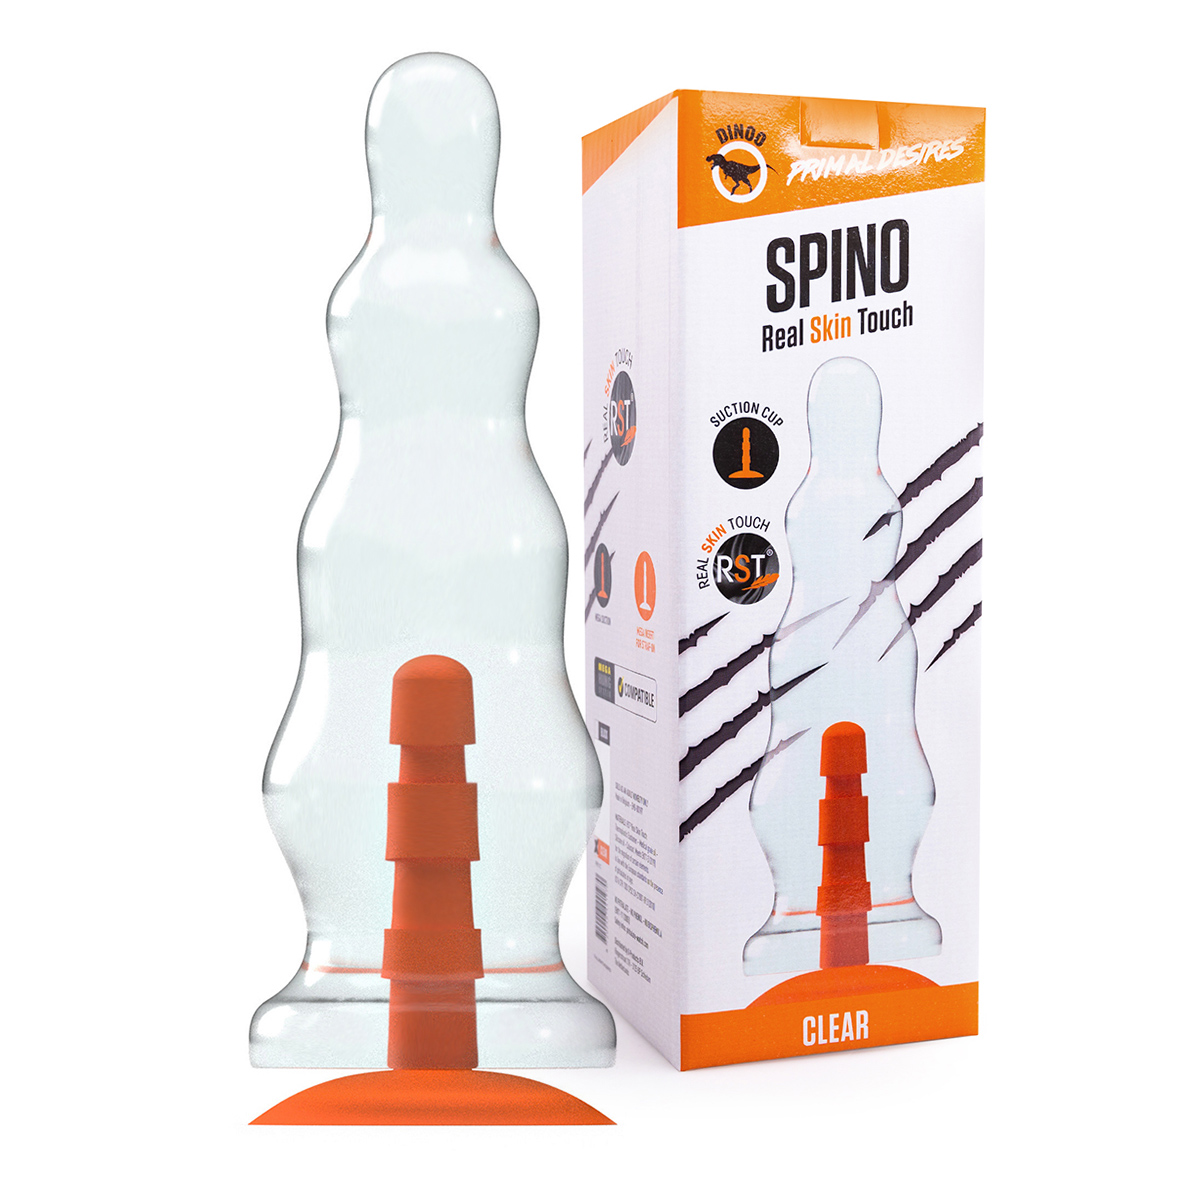 Dinoo Primal – Spino Clear